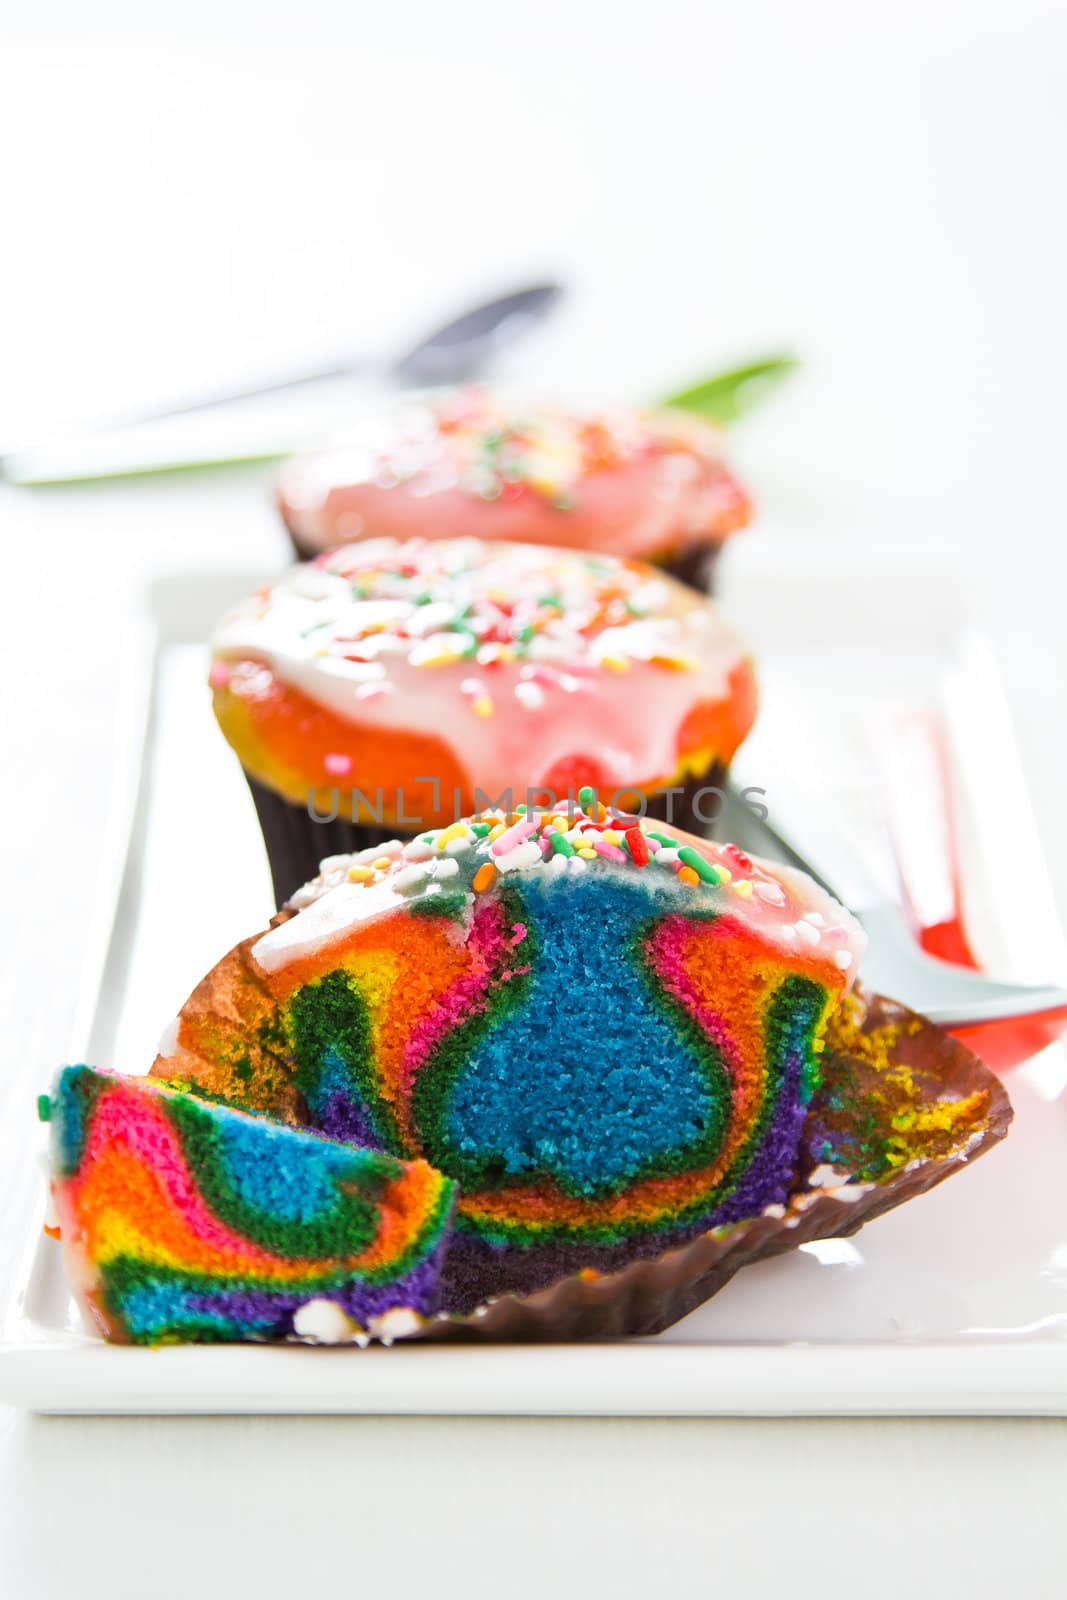 Colourful Rainbow cupcake with sugar on top